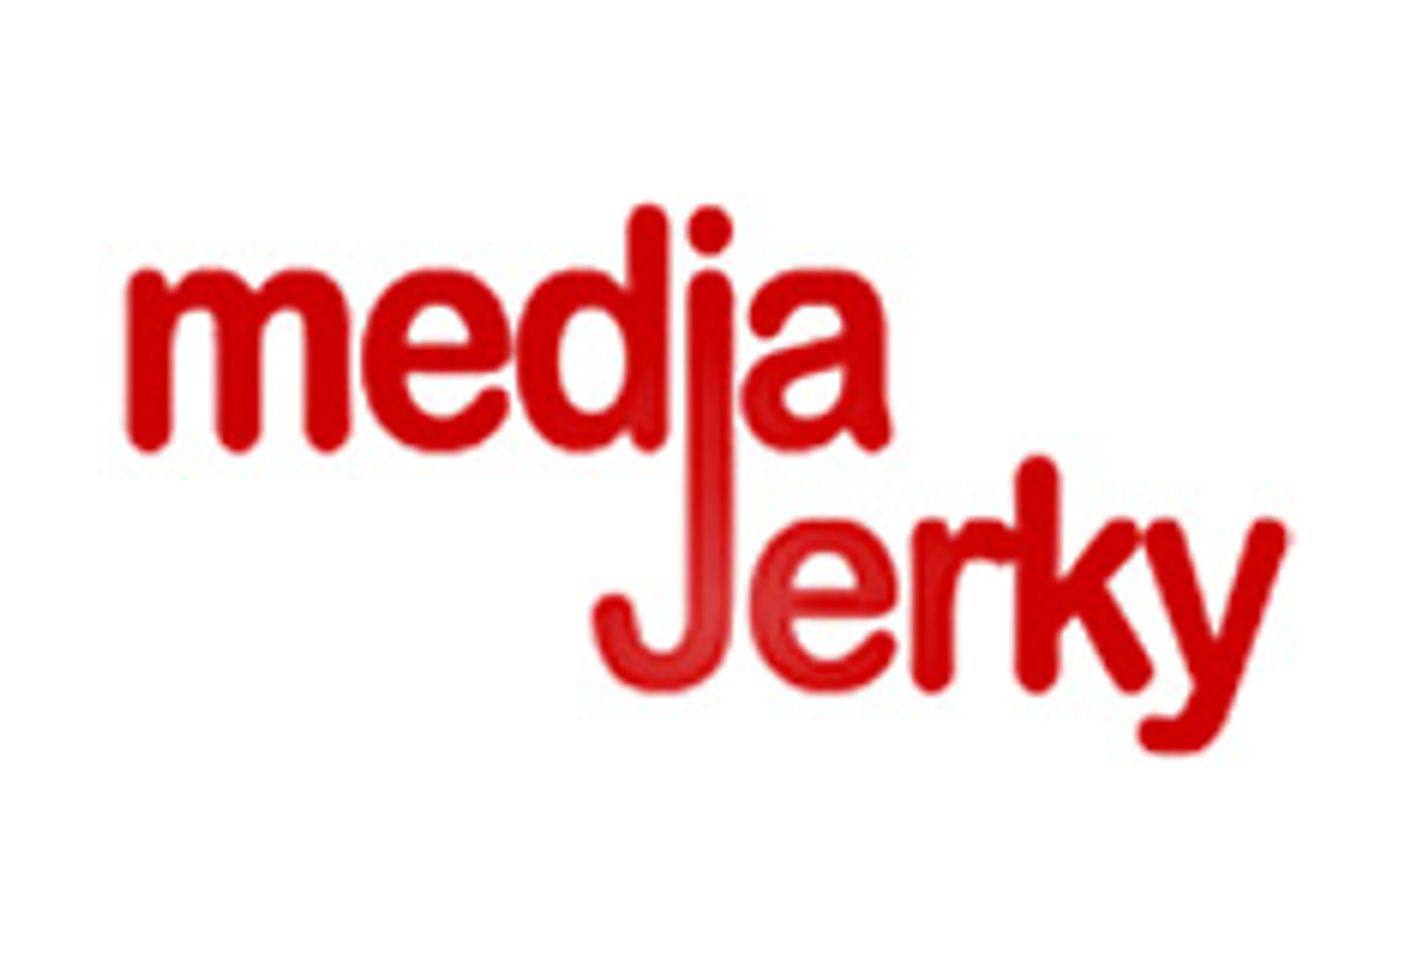 Adult Ad Network MediaJerky.com Officially Launches